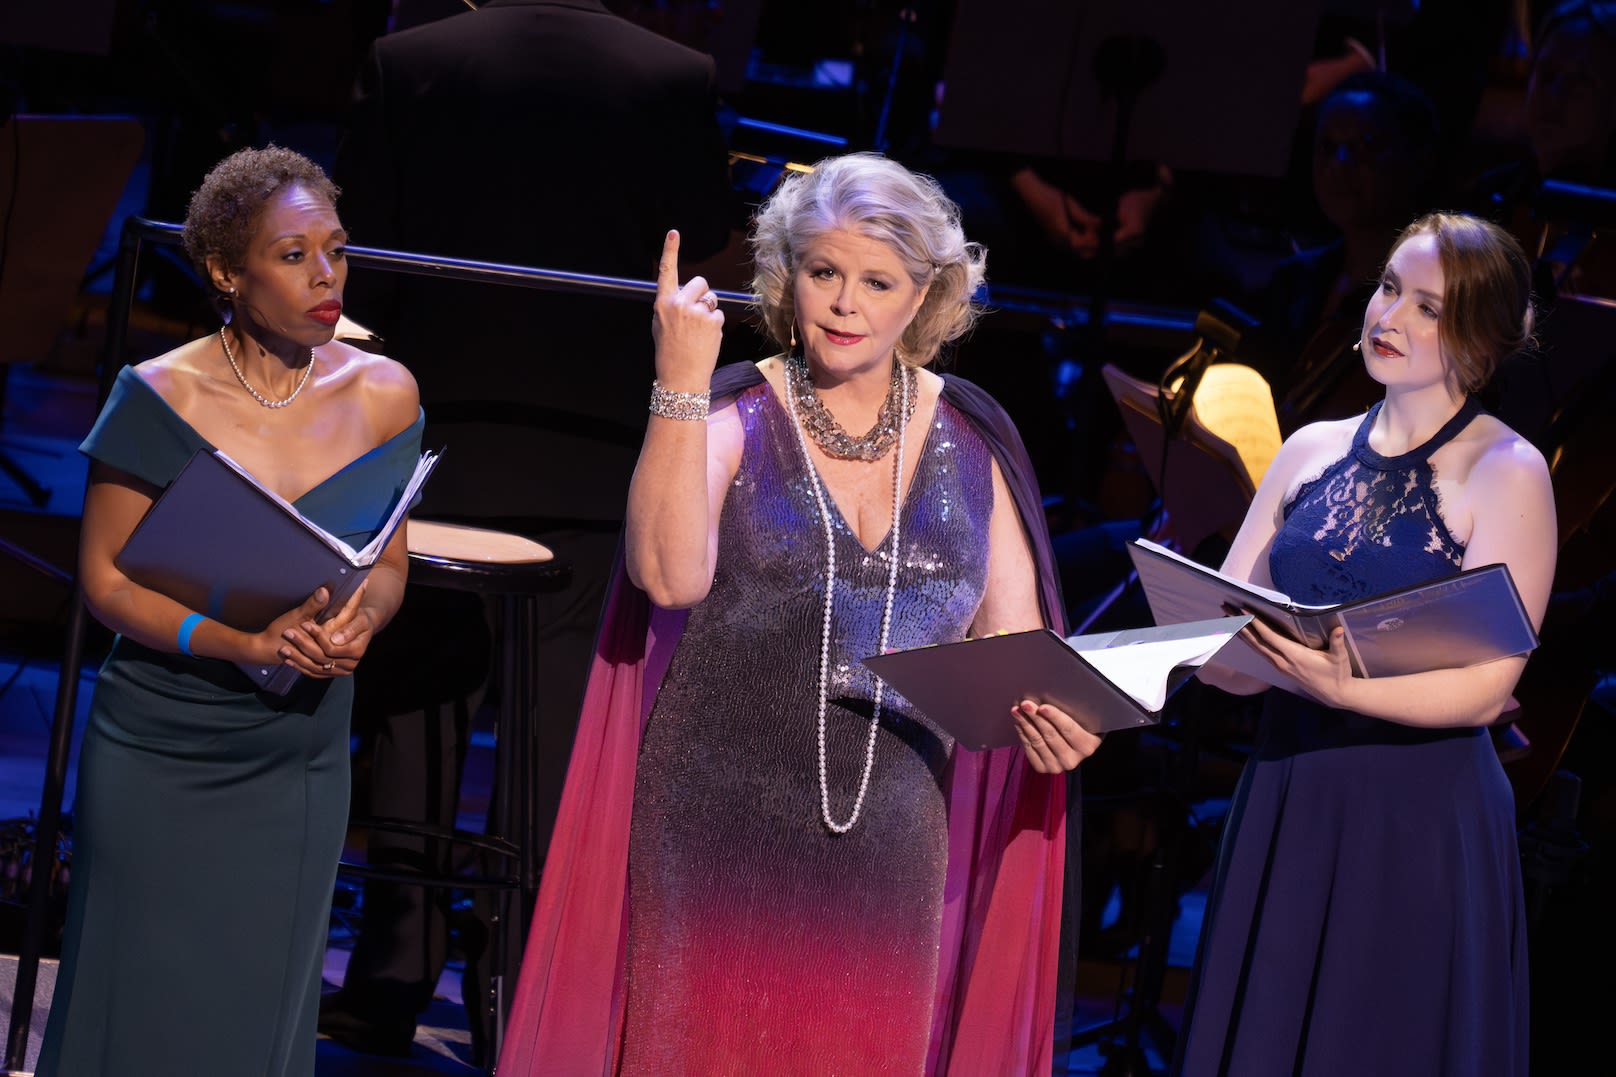 Sondheim’s ‘A Little Night Music’ Gets a New Concert Staging at Lincoln Center